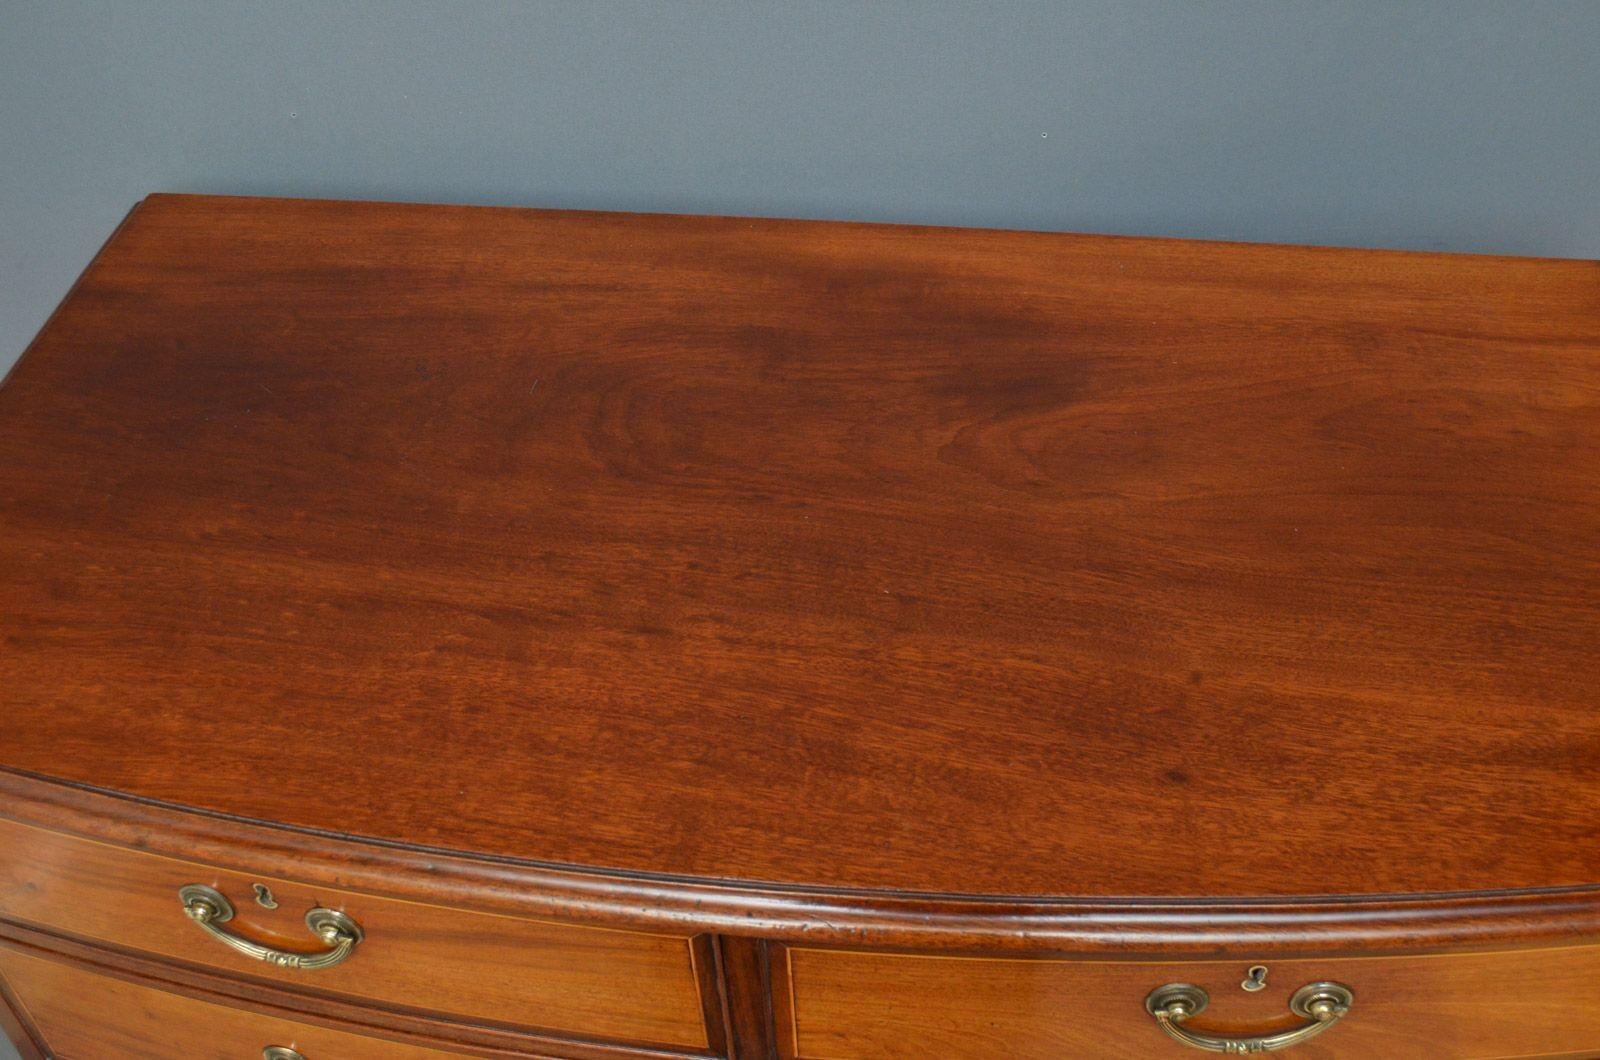 Regency Mahogany Chest of Drawers In Excellent Condition For Sale In Whaley Bridge, GB